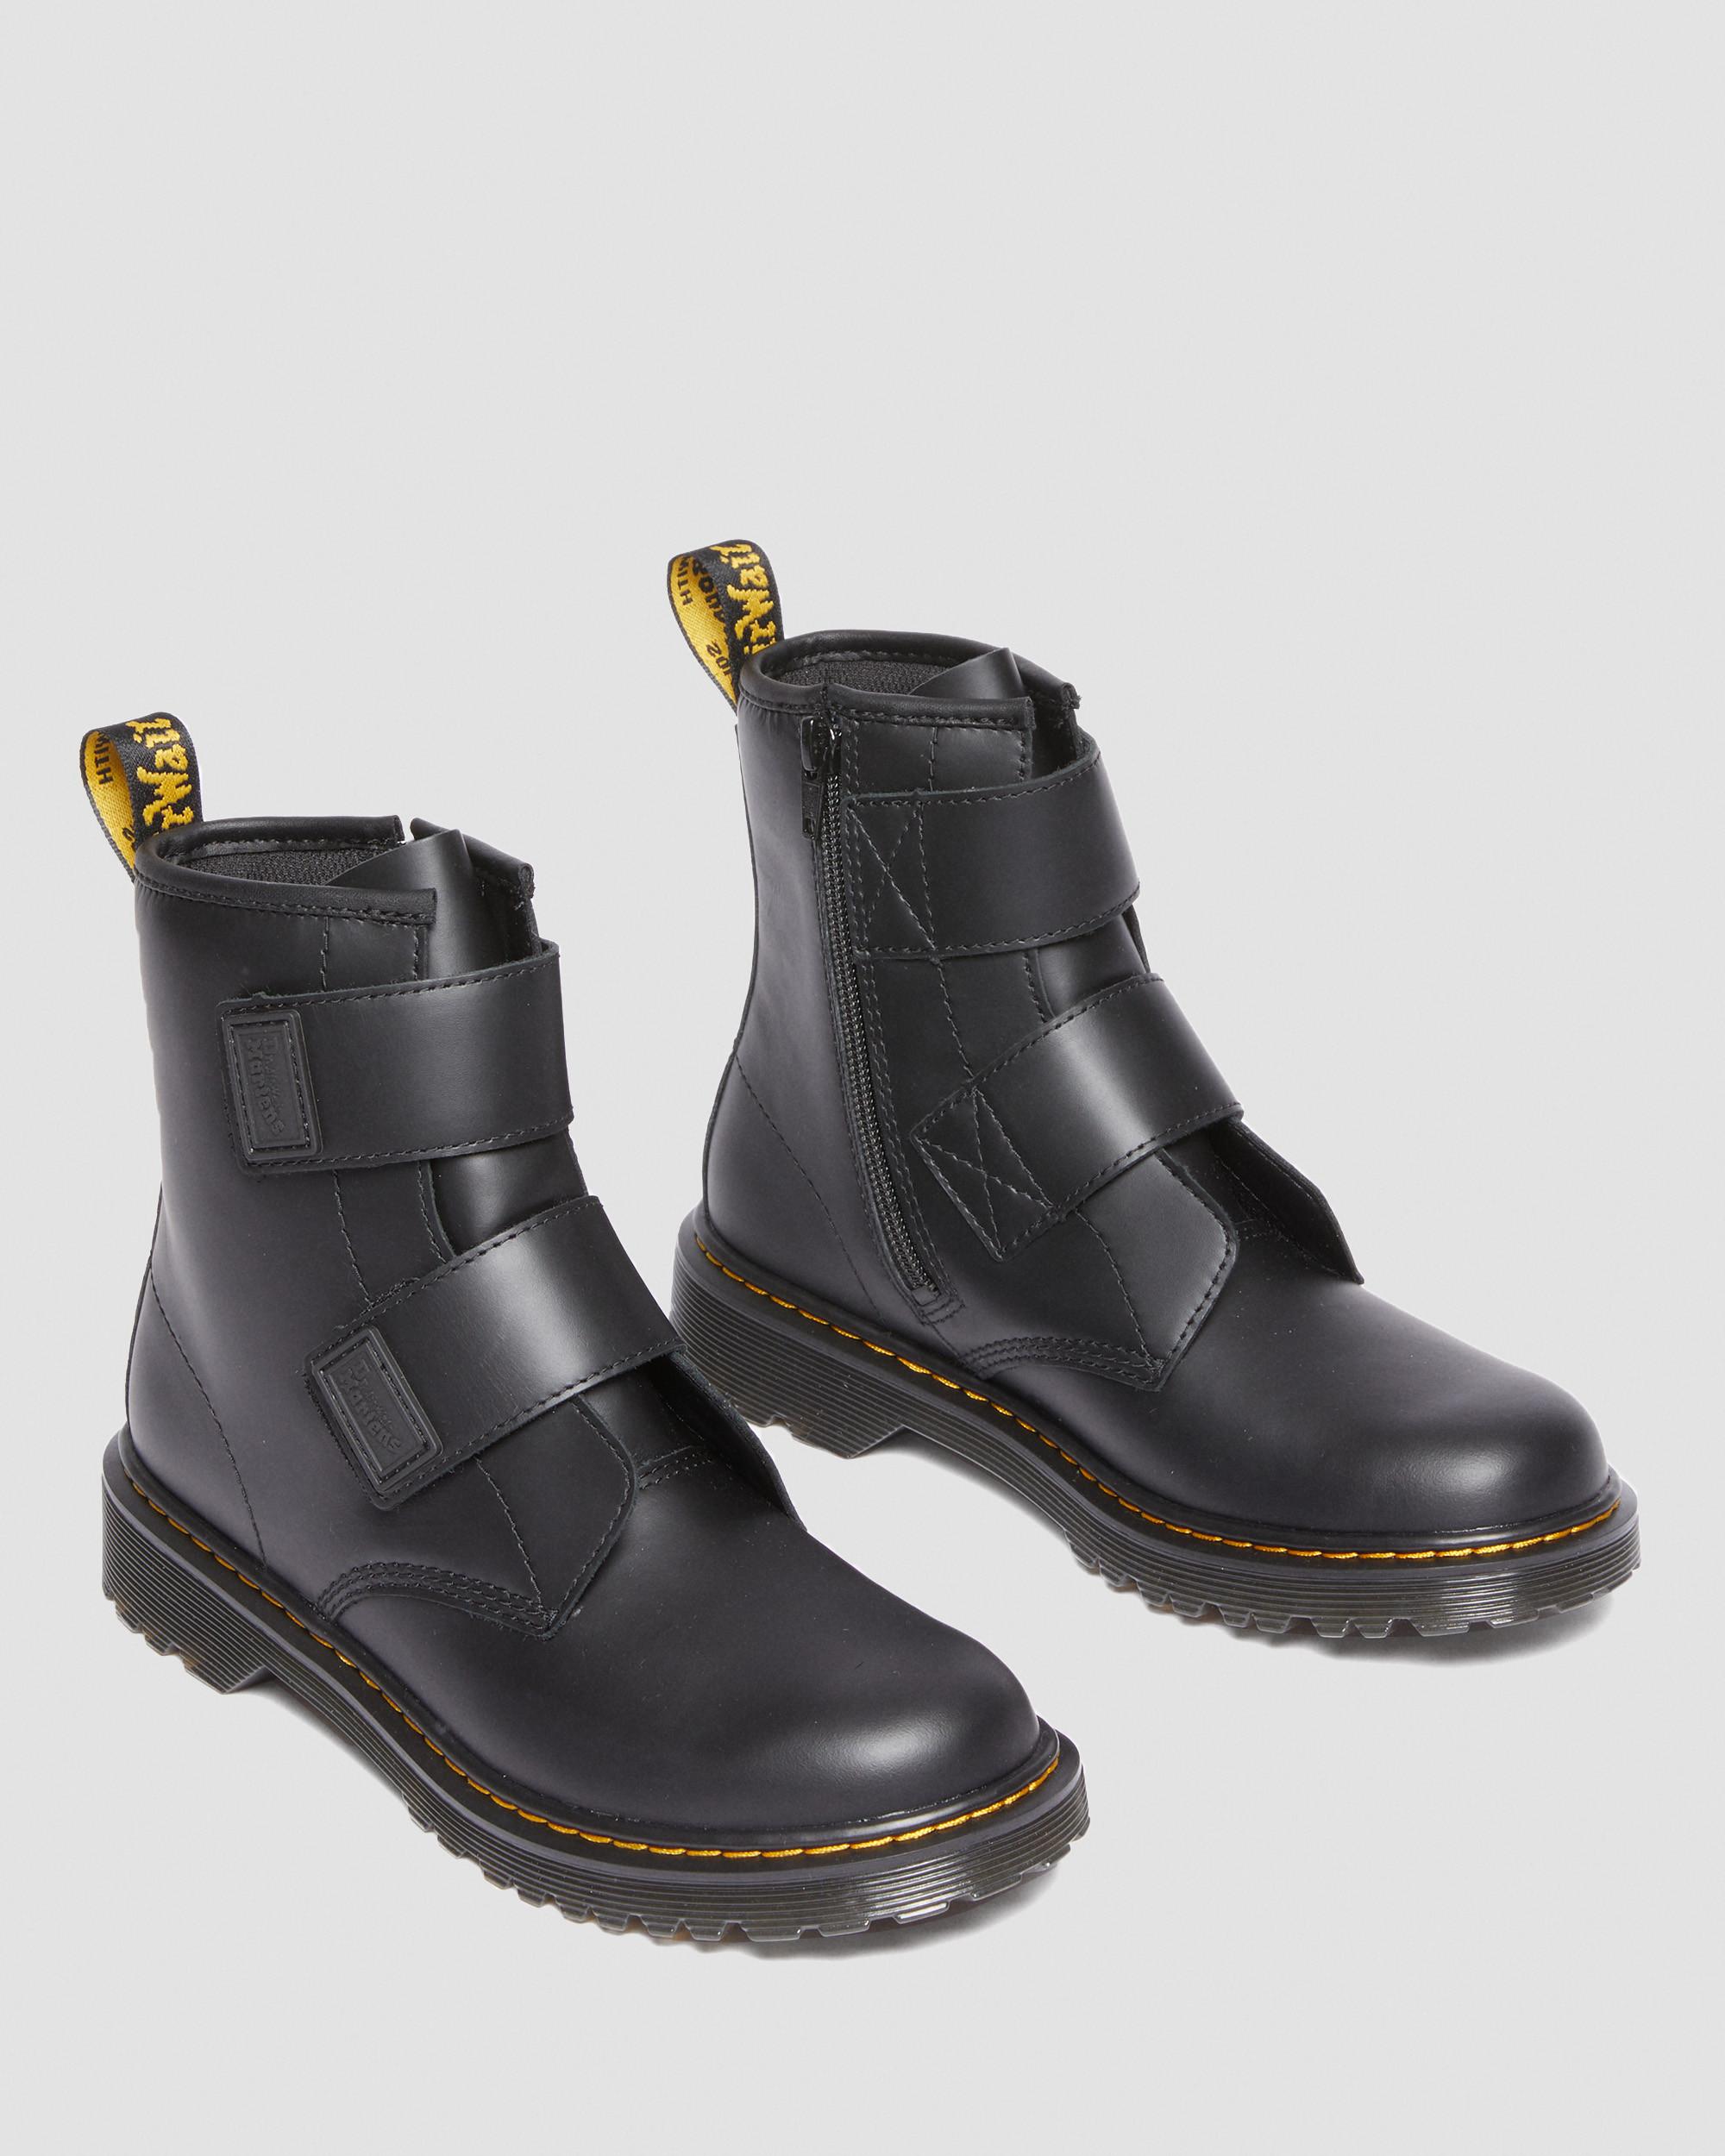 Youth 1460 Leather Strap Velcro Boots BlackYouth 1460 Leather Strap Velcro Boots  Dr. Martens